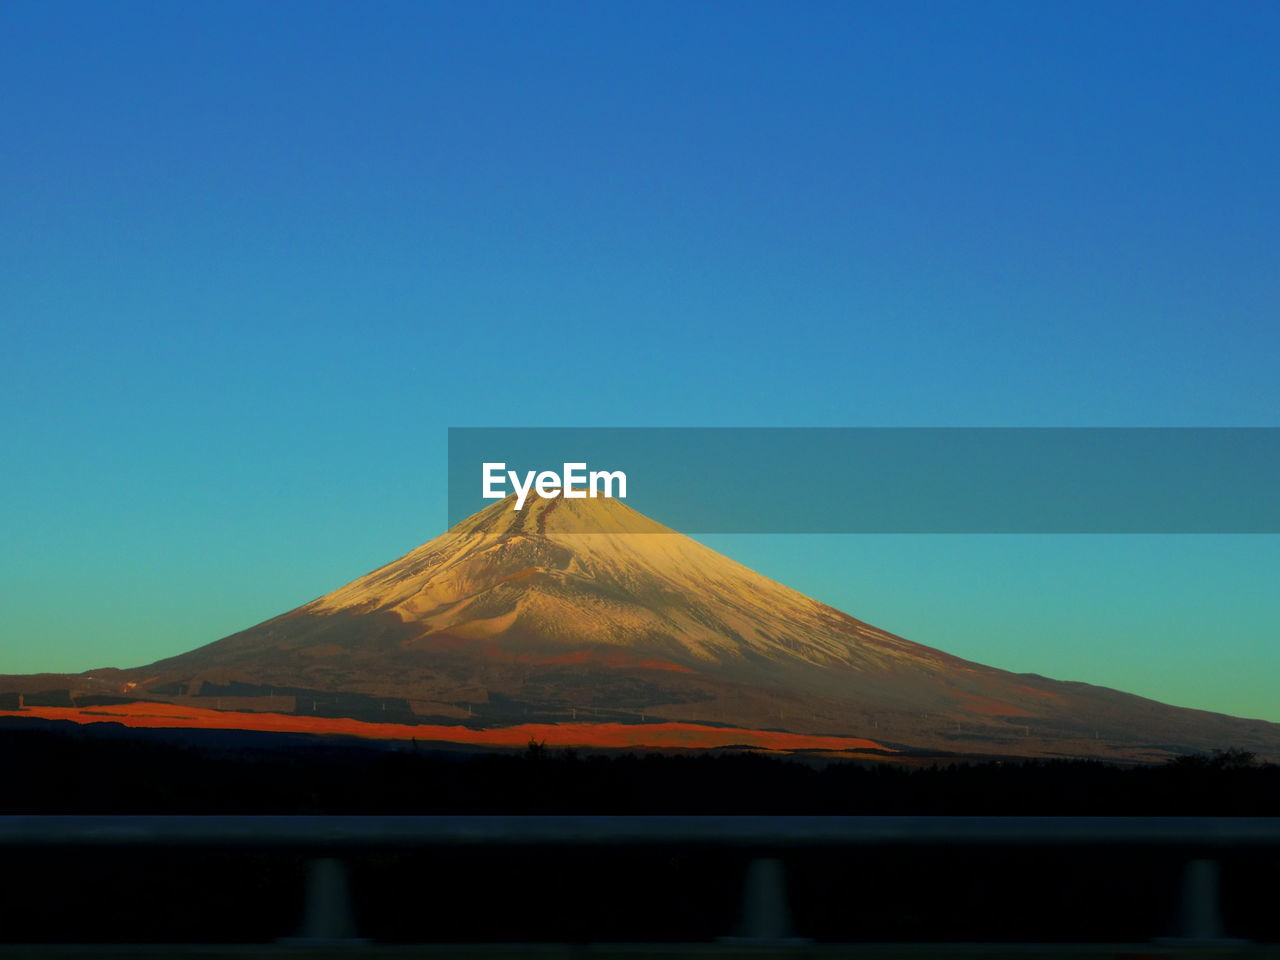 Scenic view of mt fuji against clear blue sky